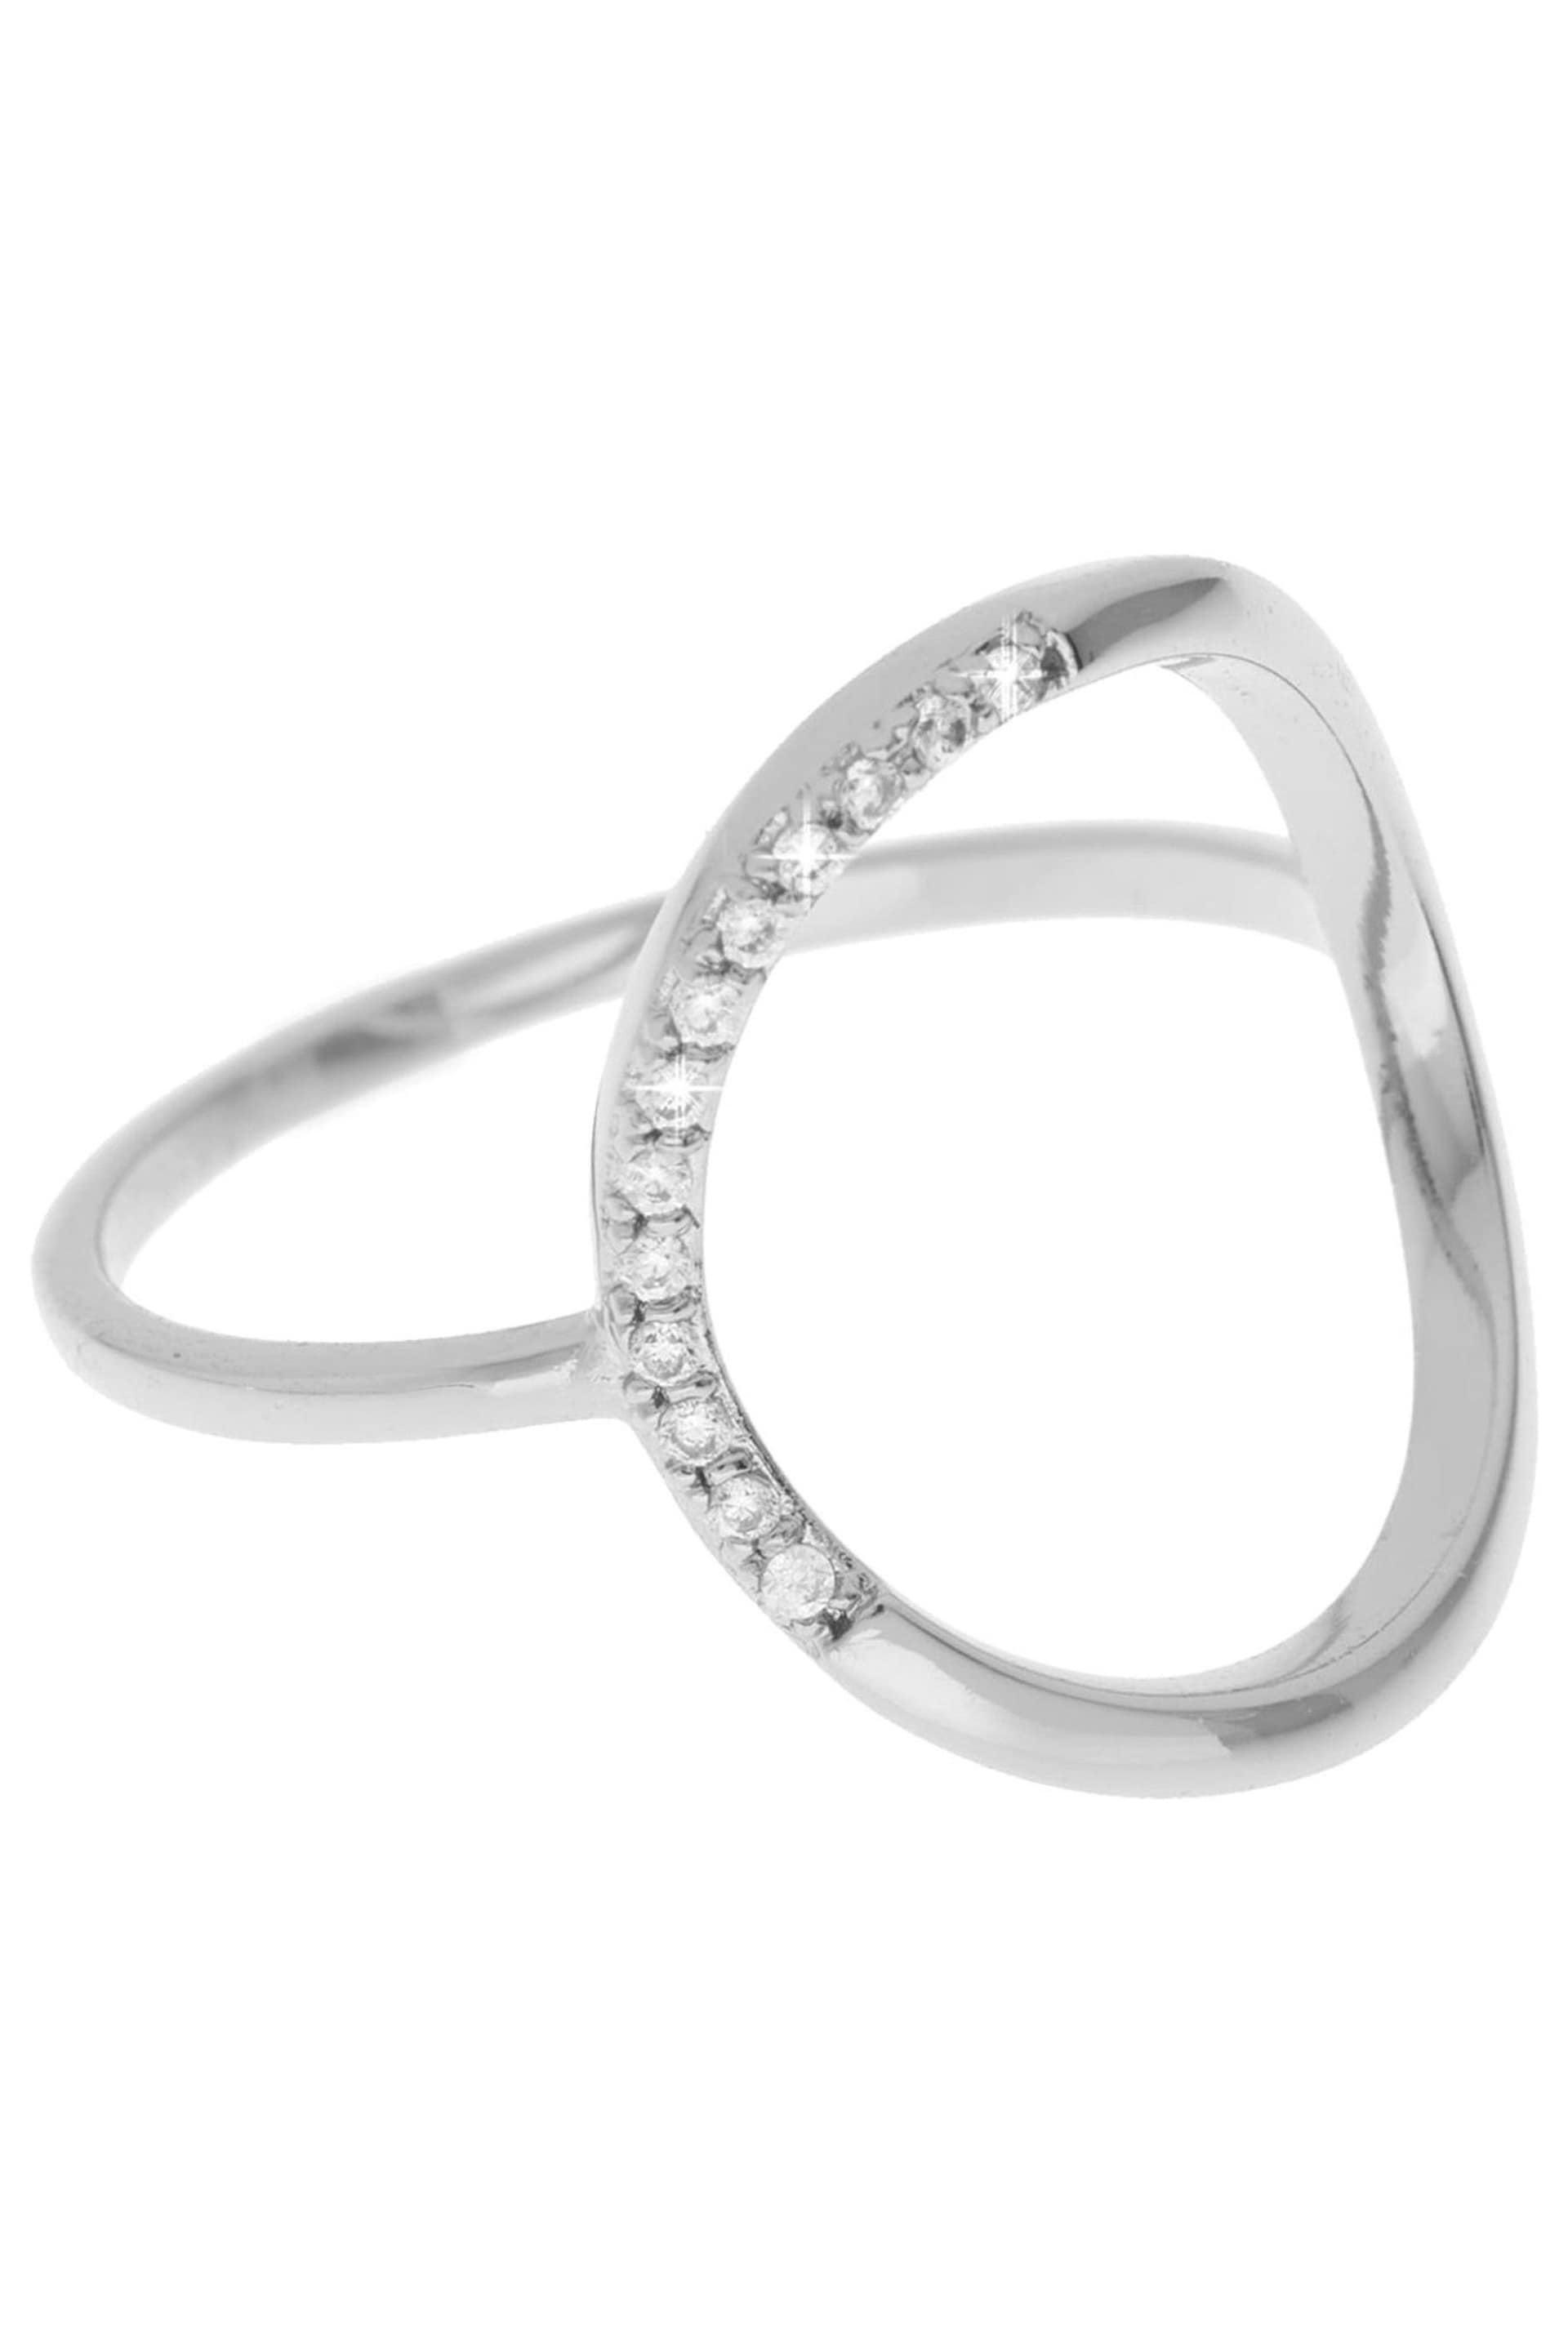 Mint Velvet Silver Plated Oval Pave Ring - Image 4 of 4